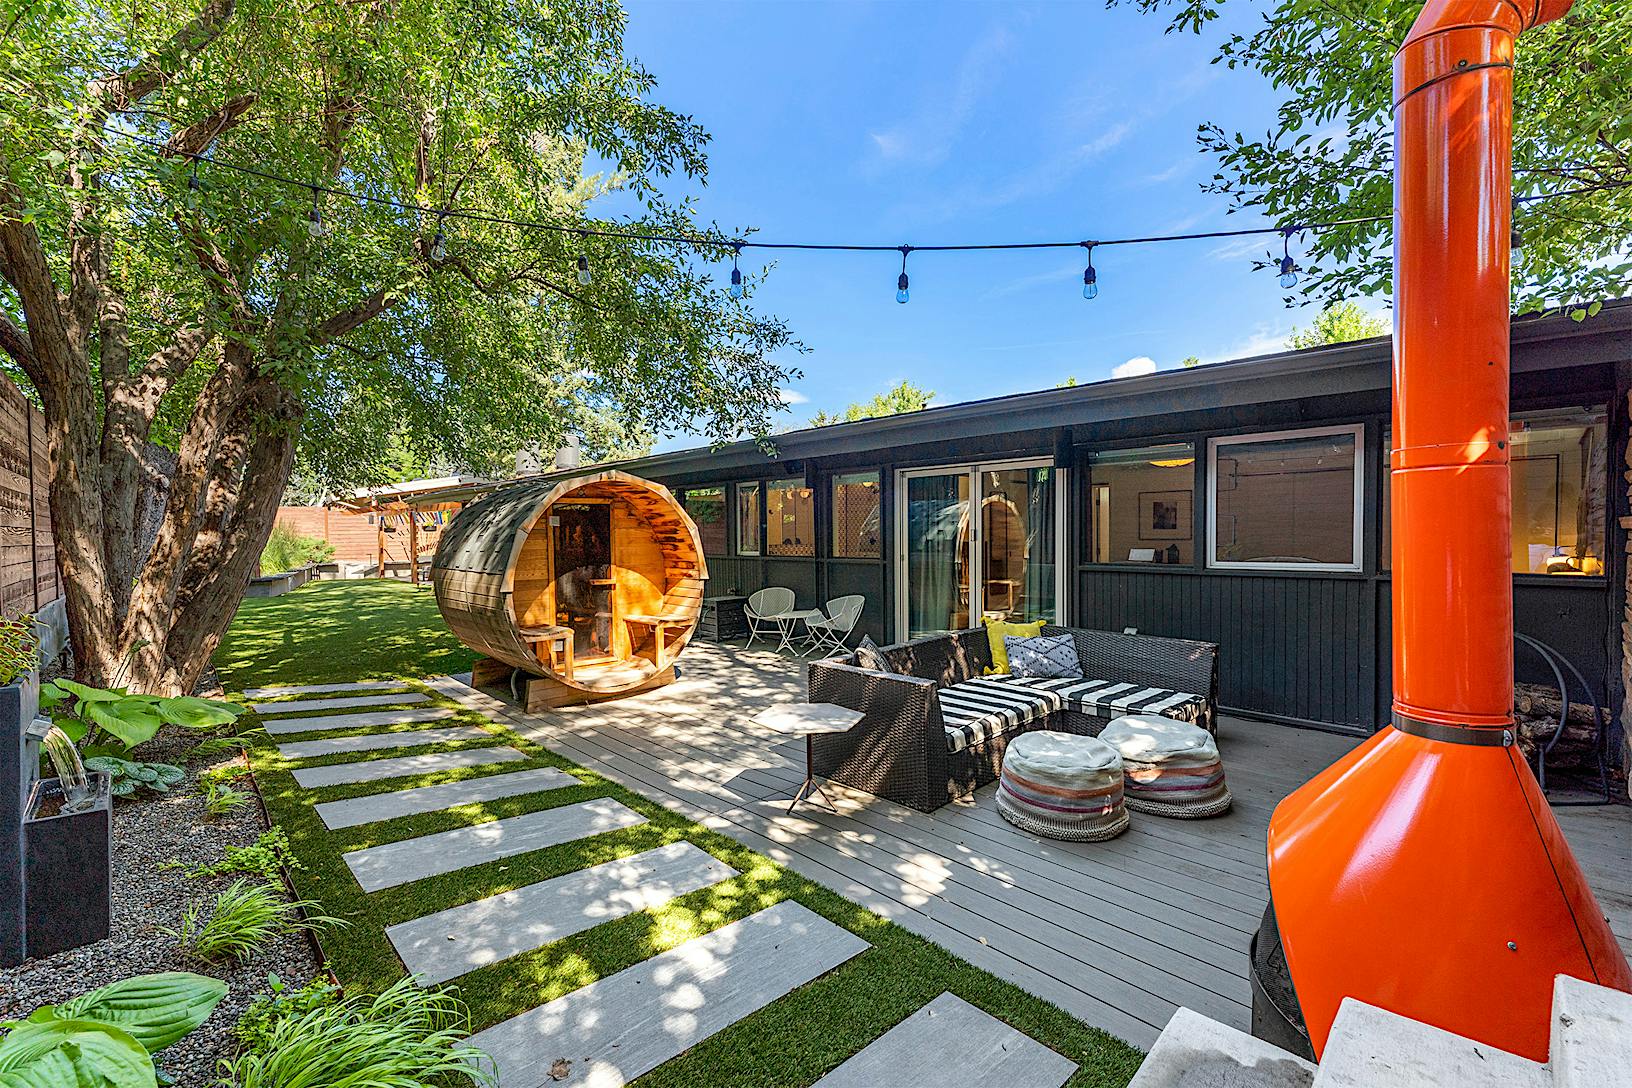 A modern backyard featuring a wooden deck with seating, a unique cylindrical wooden sauna, glass doors leading to the house.